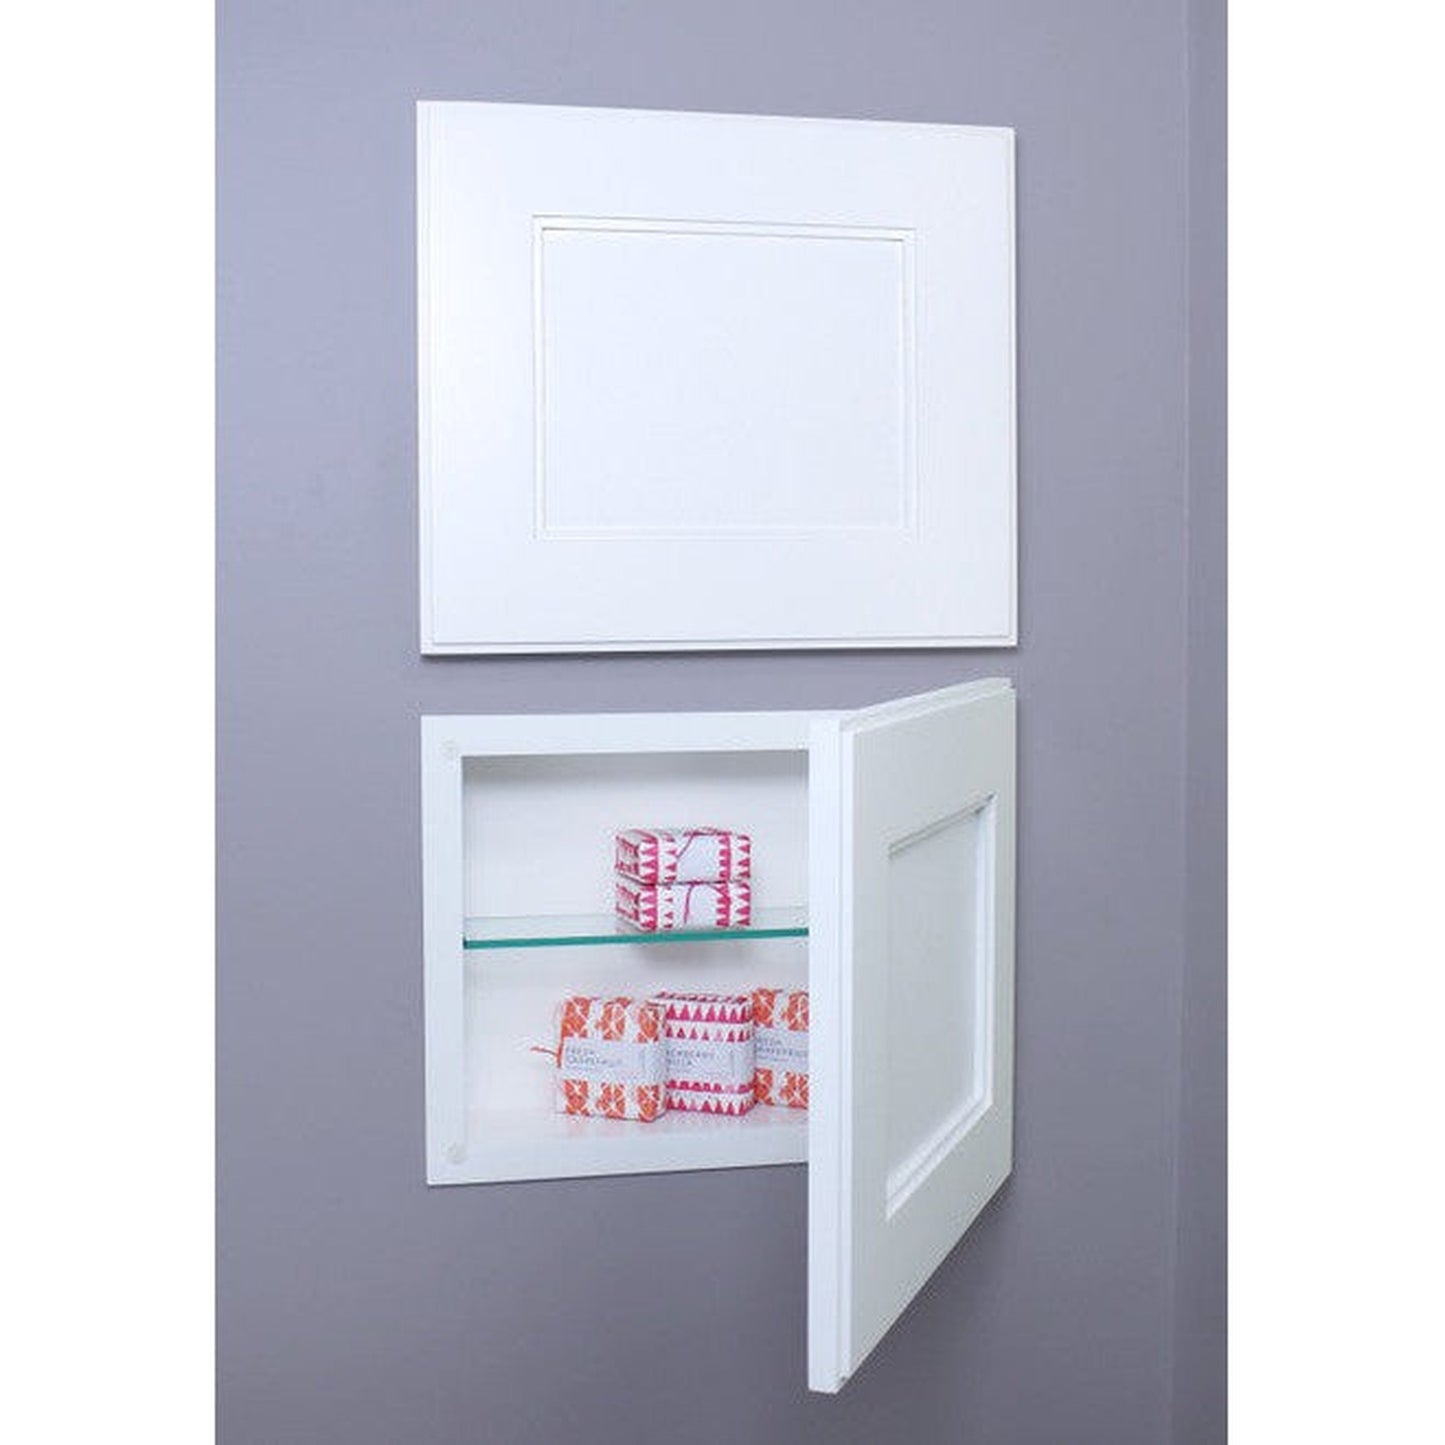 Fox Hollow Furnishings 11" x 14" White Compact Landscape Shaker Style Special 3" Depth Recessed Medicine Cabinet With Mirror